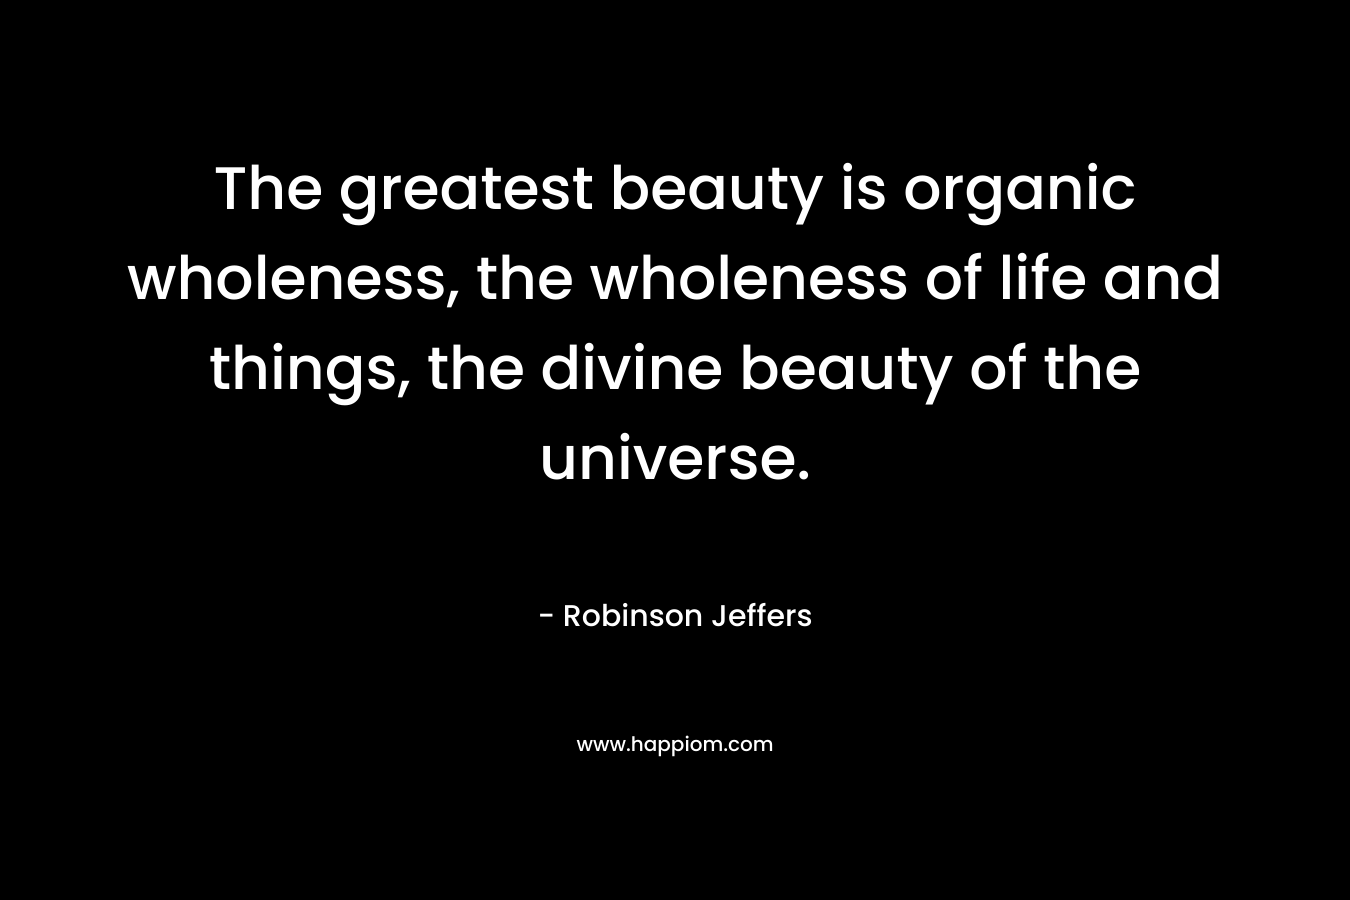 The greatest beauty is organic wholeness, the wholeness of life and things, the divine beauty of the universe.